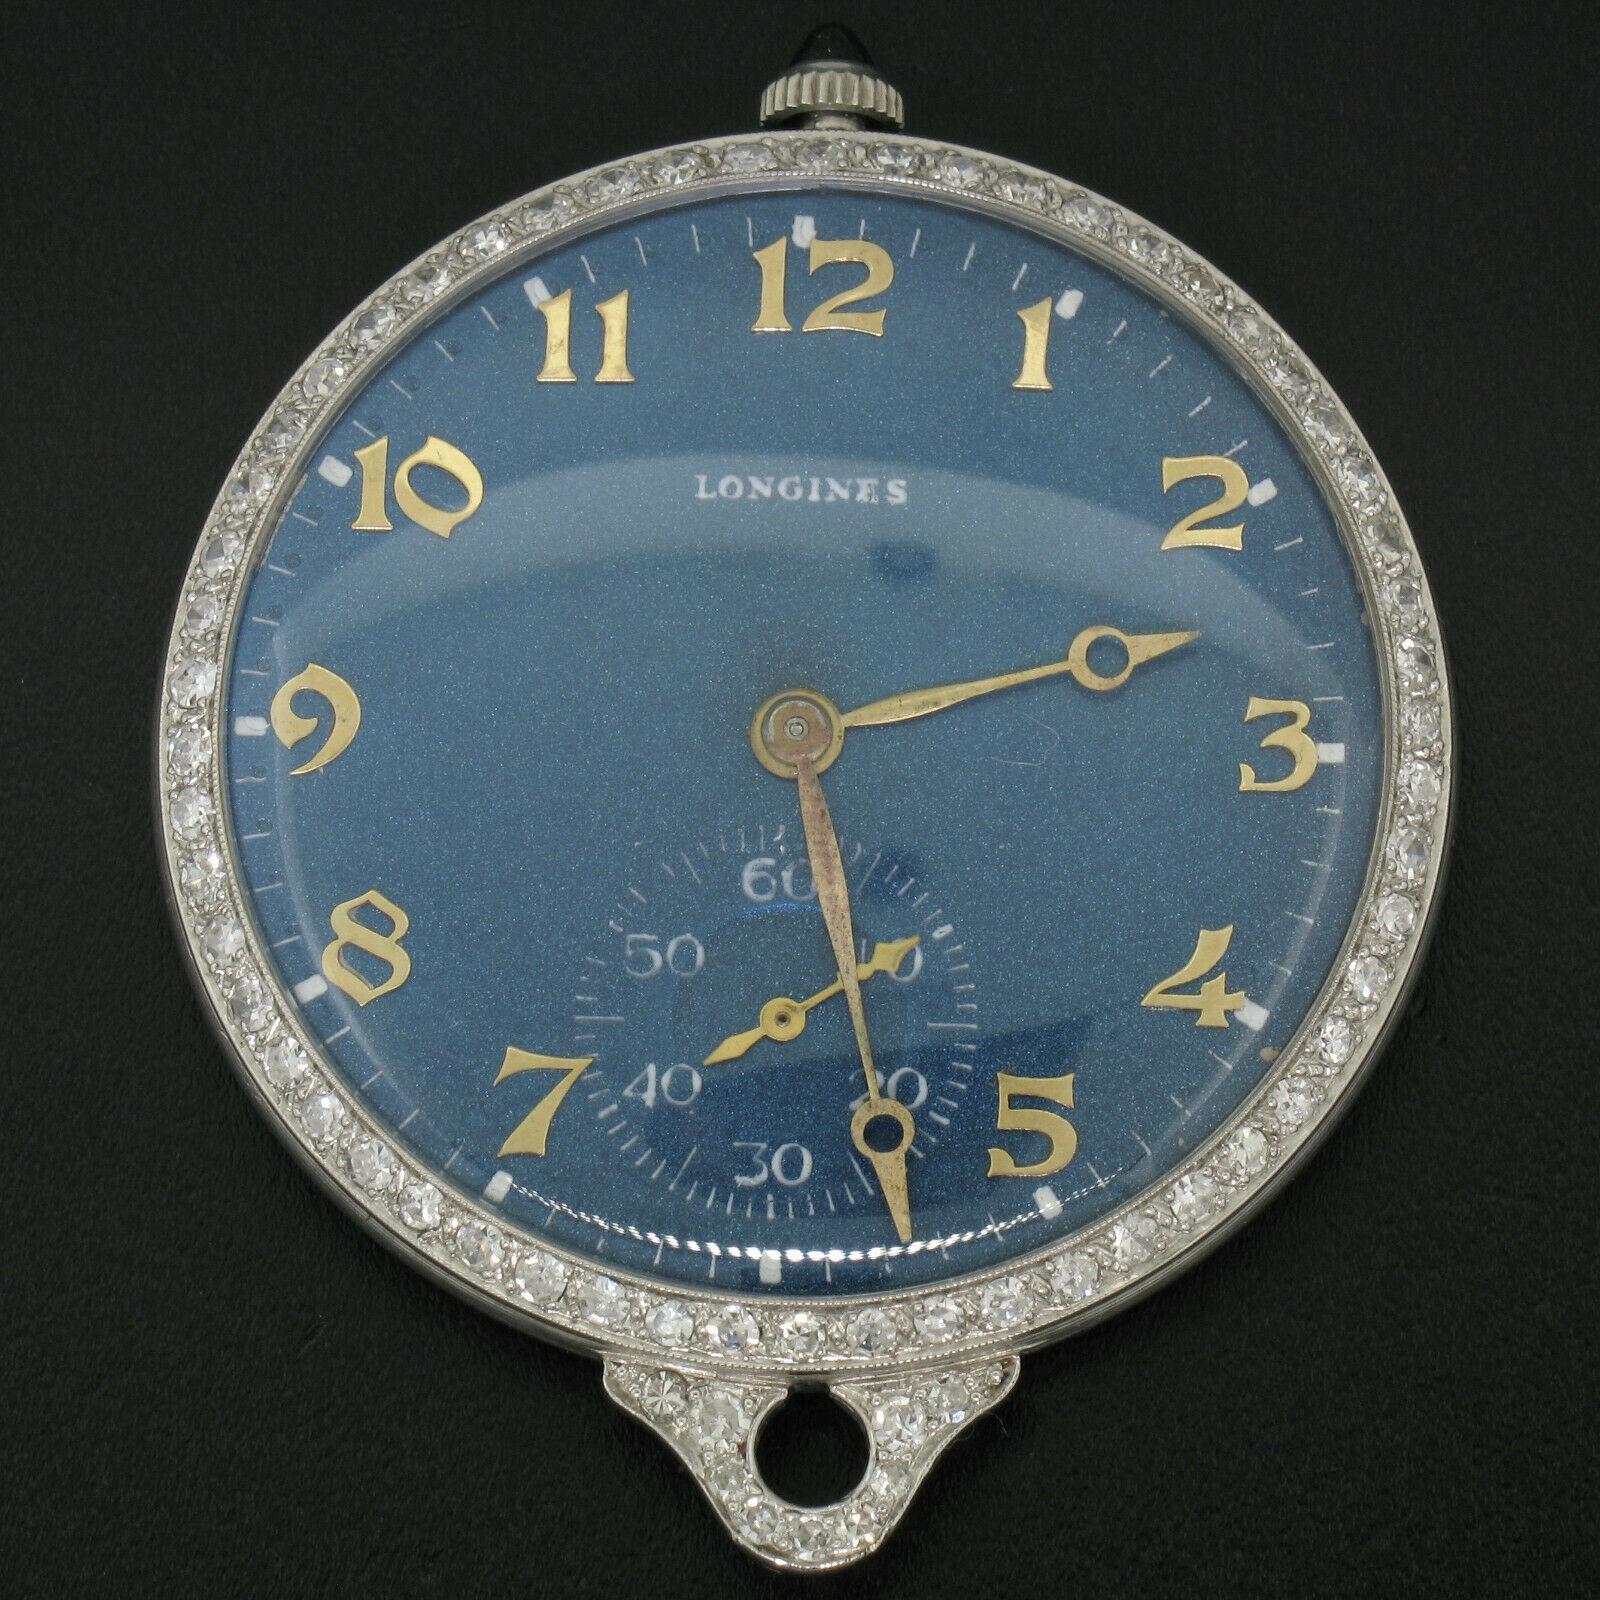 This magnificent Swiss pocket/pendant watch was made by the Longines Watch Co. during the 1920's and features their 